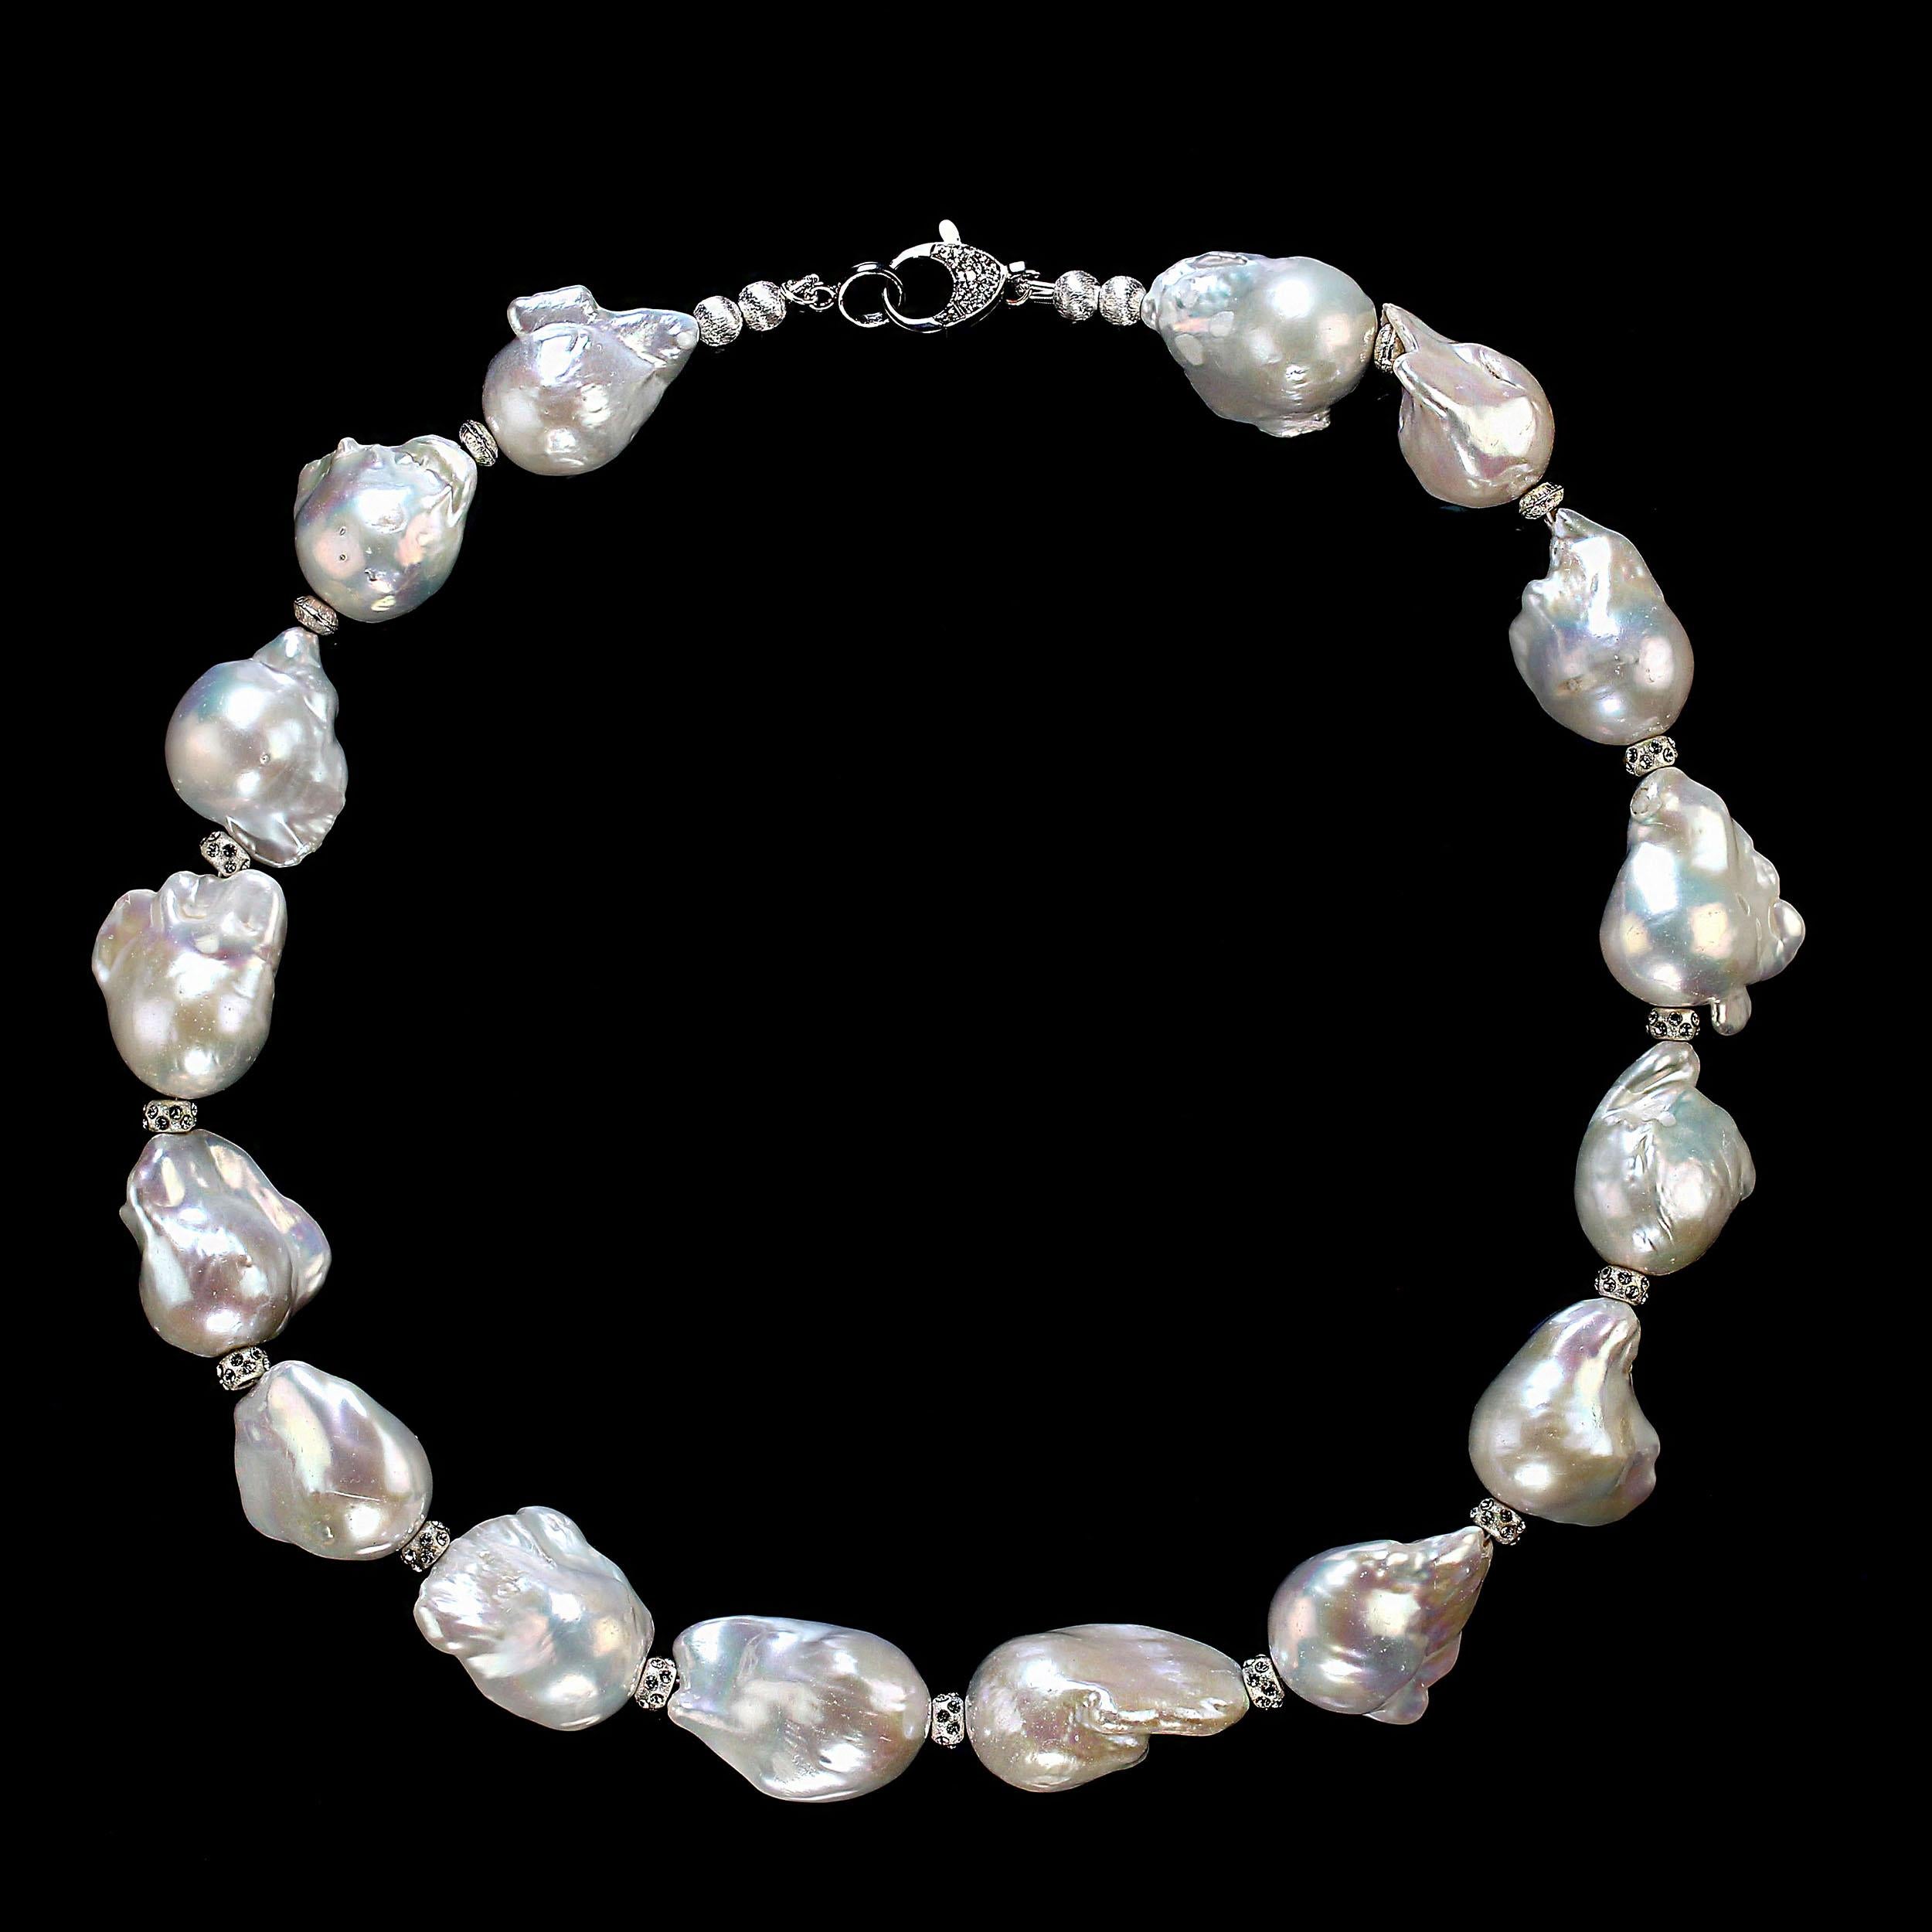 Bead AJD 19 Inch Giant White Baroque Pearl Necklace with Sparkling Crystal Accents For Sale